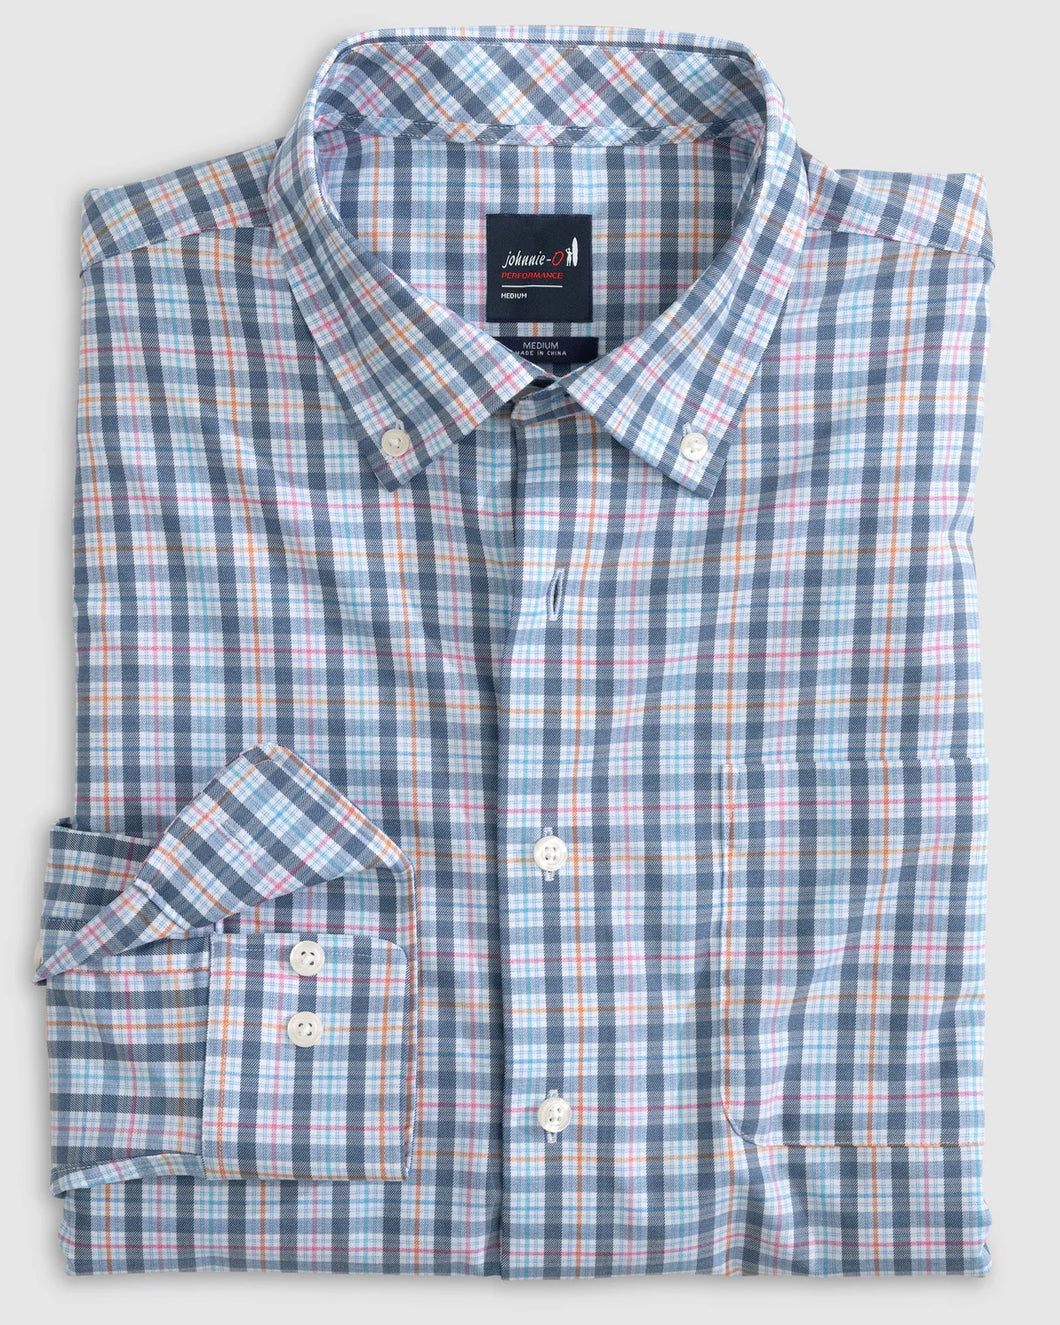 Johnnie-O Dells Performance Button-Up Shirt in Navy